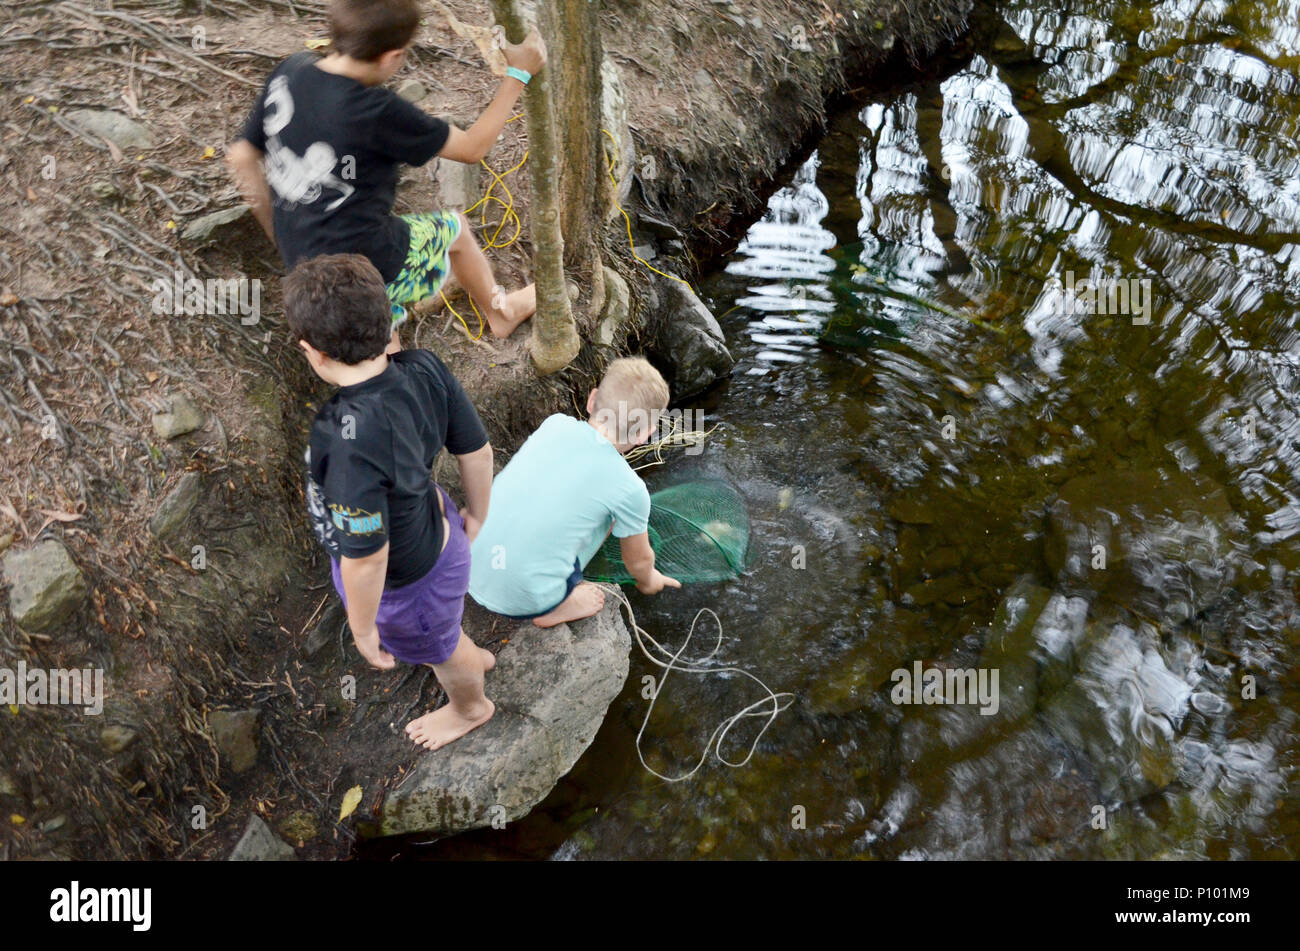 Children fishing for crabs and yabbies Stock Photo